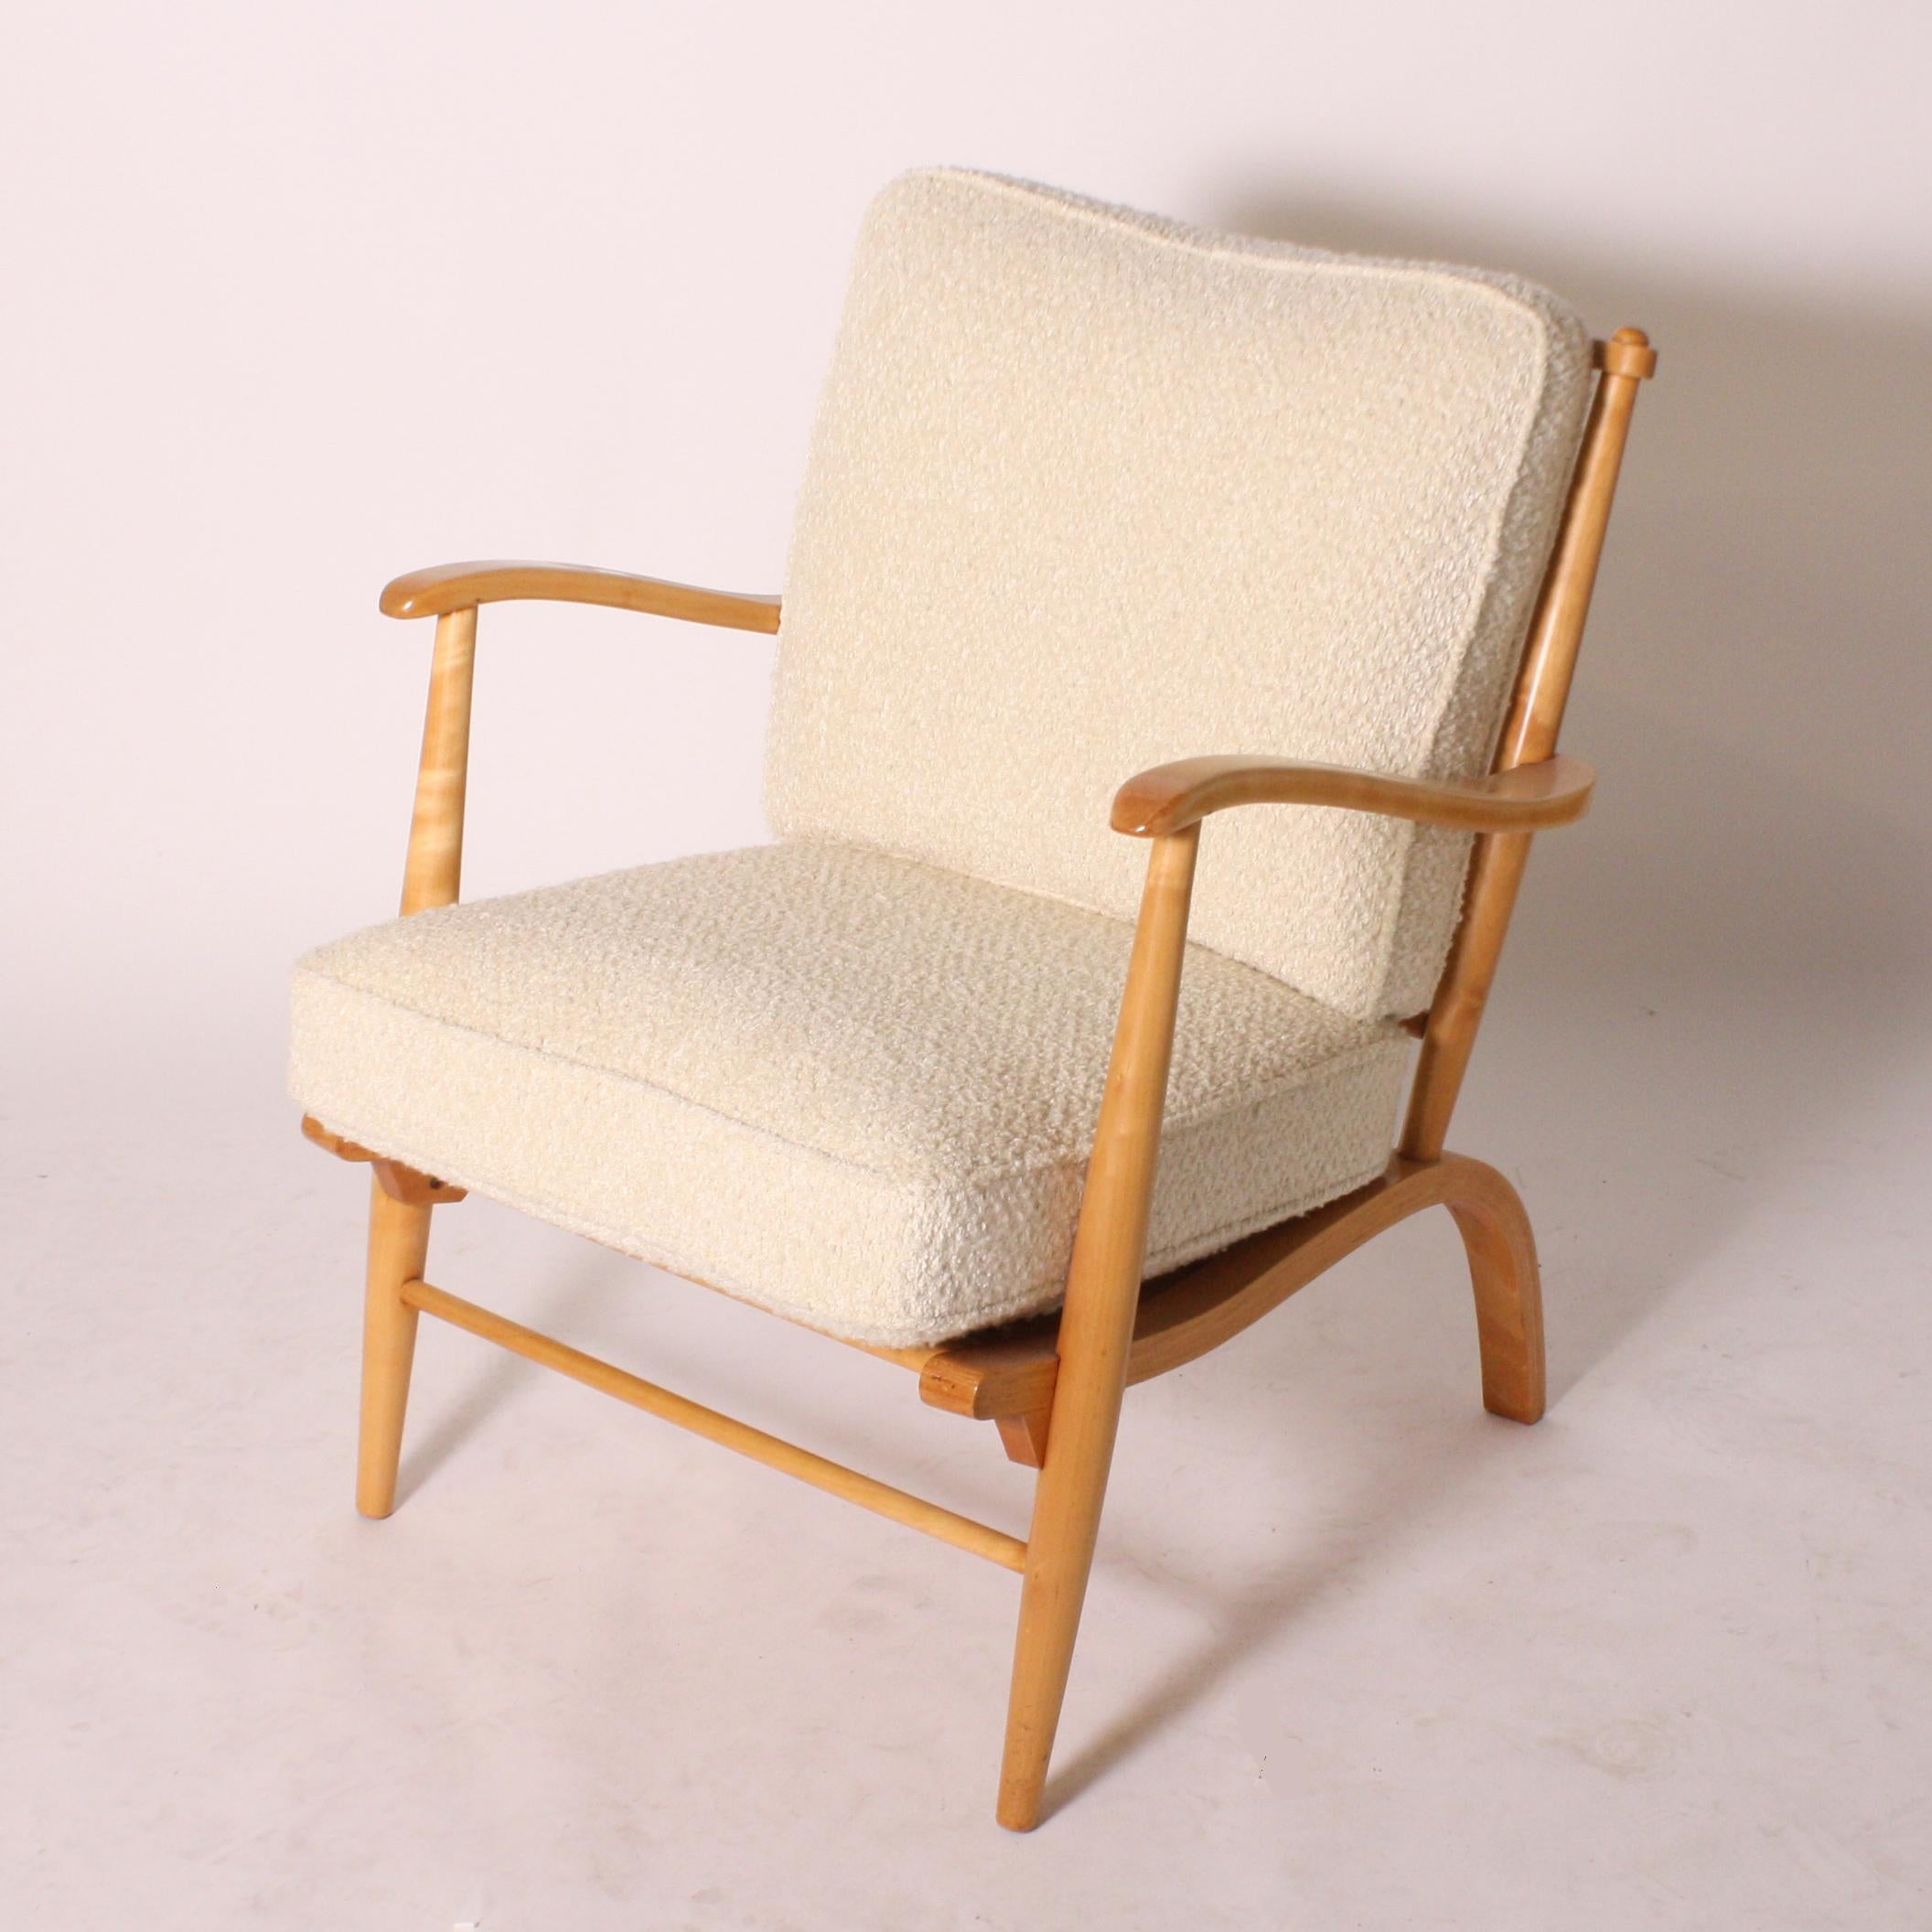 Mid-20th Century French Lemon Wood Chair, circa 1950 For Sale